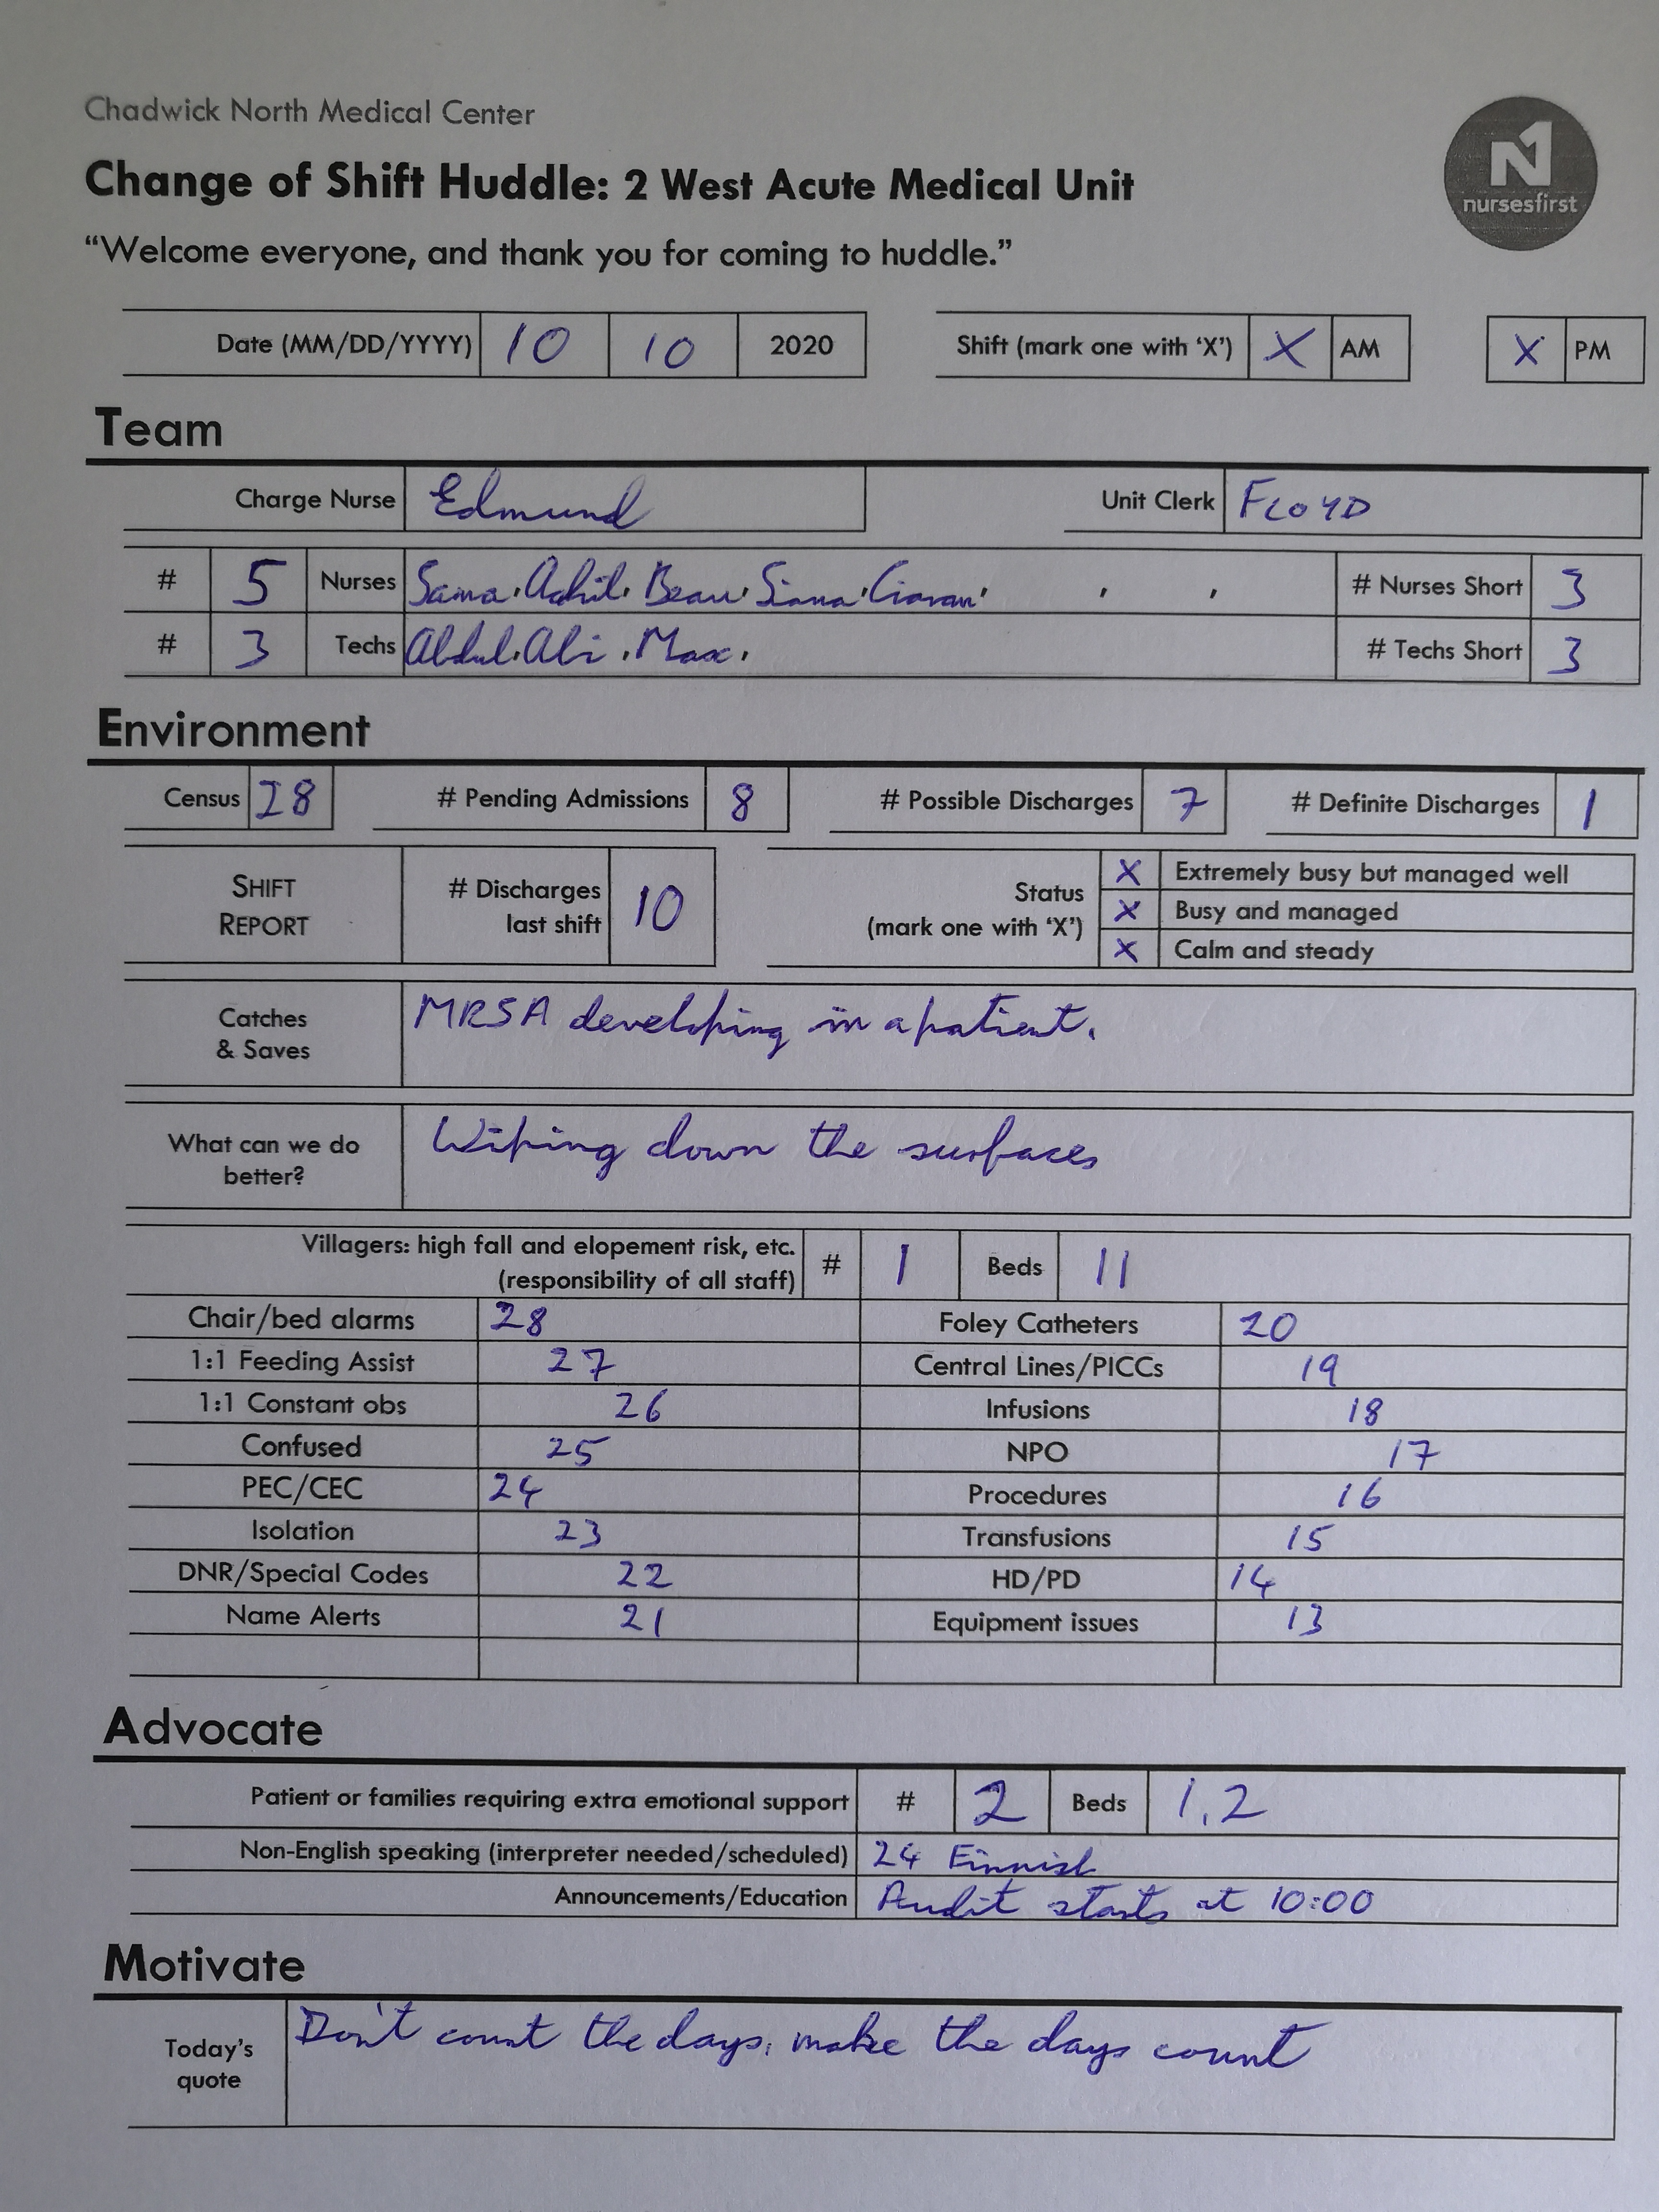 An example of a completed Change of Shift Huddle form